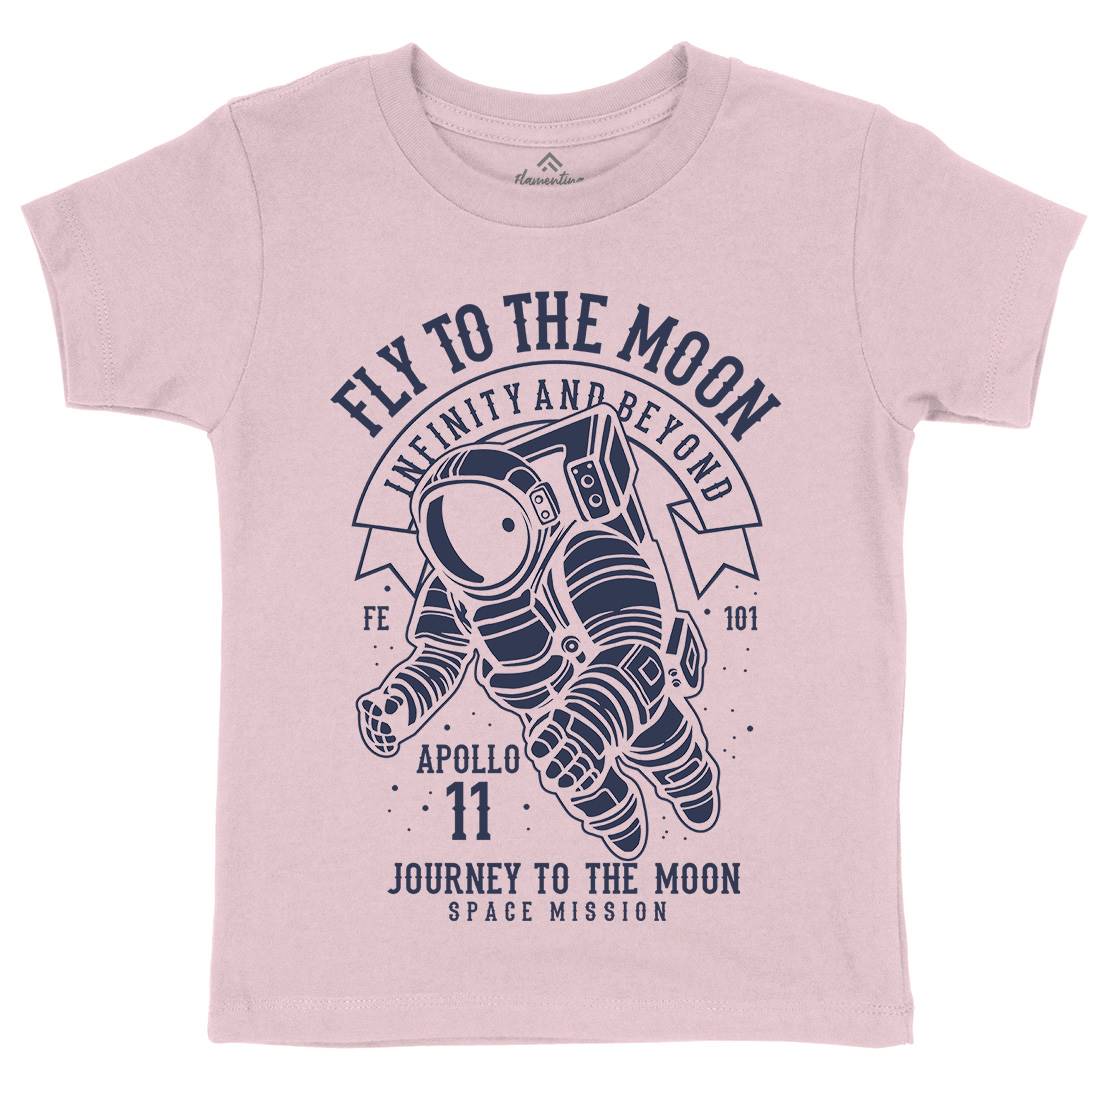 Fly To The Moon Kids Crew Neck T-Shirt Space B210